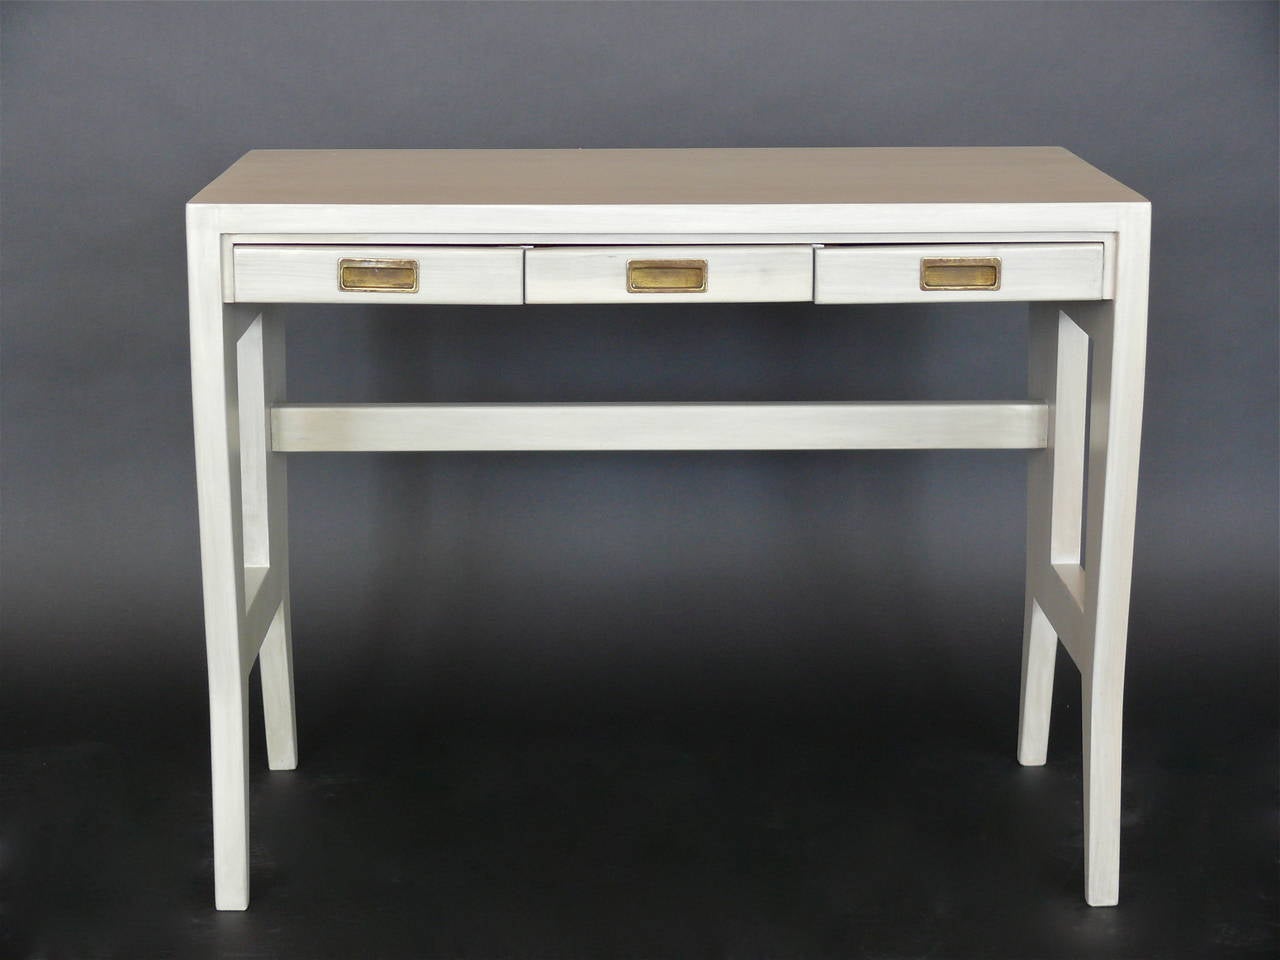 Incredible Gio Ponti desk from the University of Padua. Three pull-out drawers with beautiful brass detailing. Fantastic and functional size, would make an excellent writing desk, vanity, or console. A 1940 design for University of Padua, later